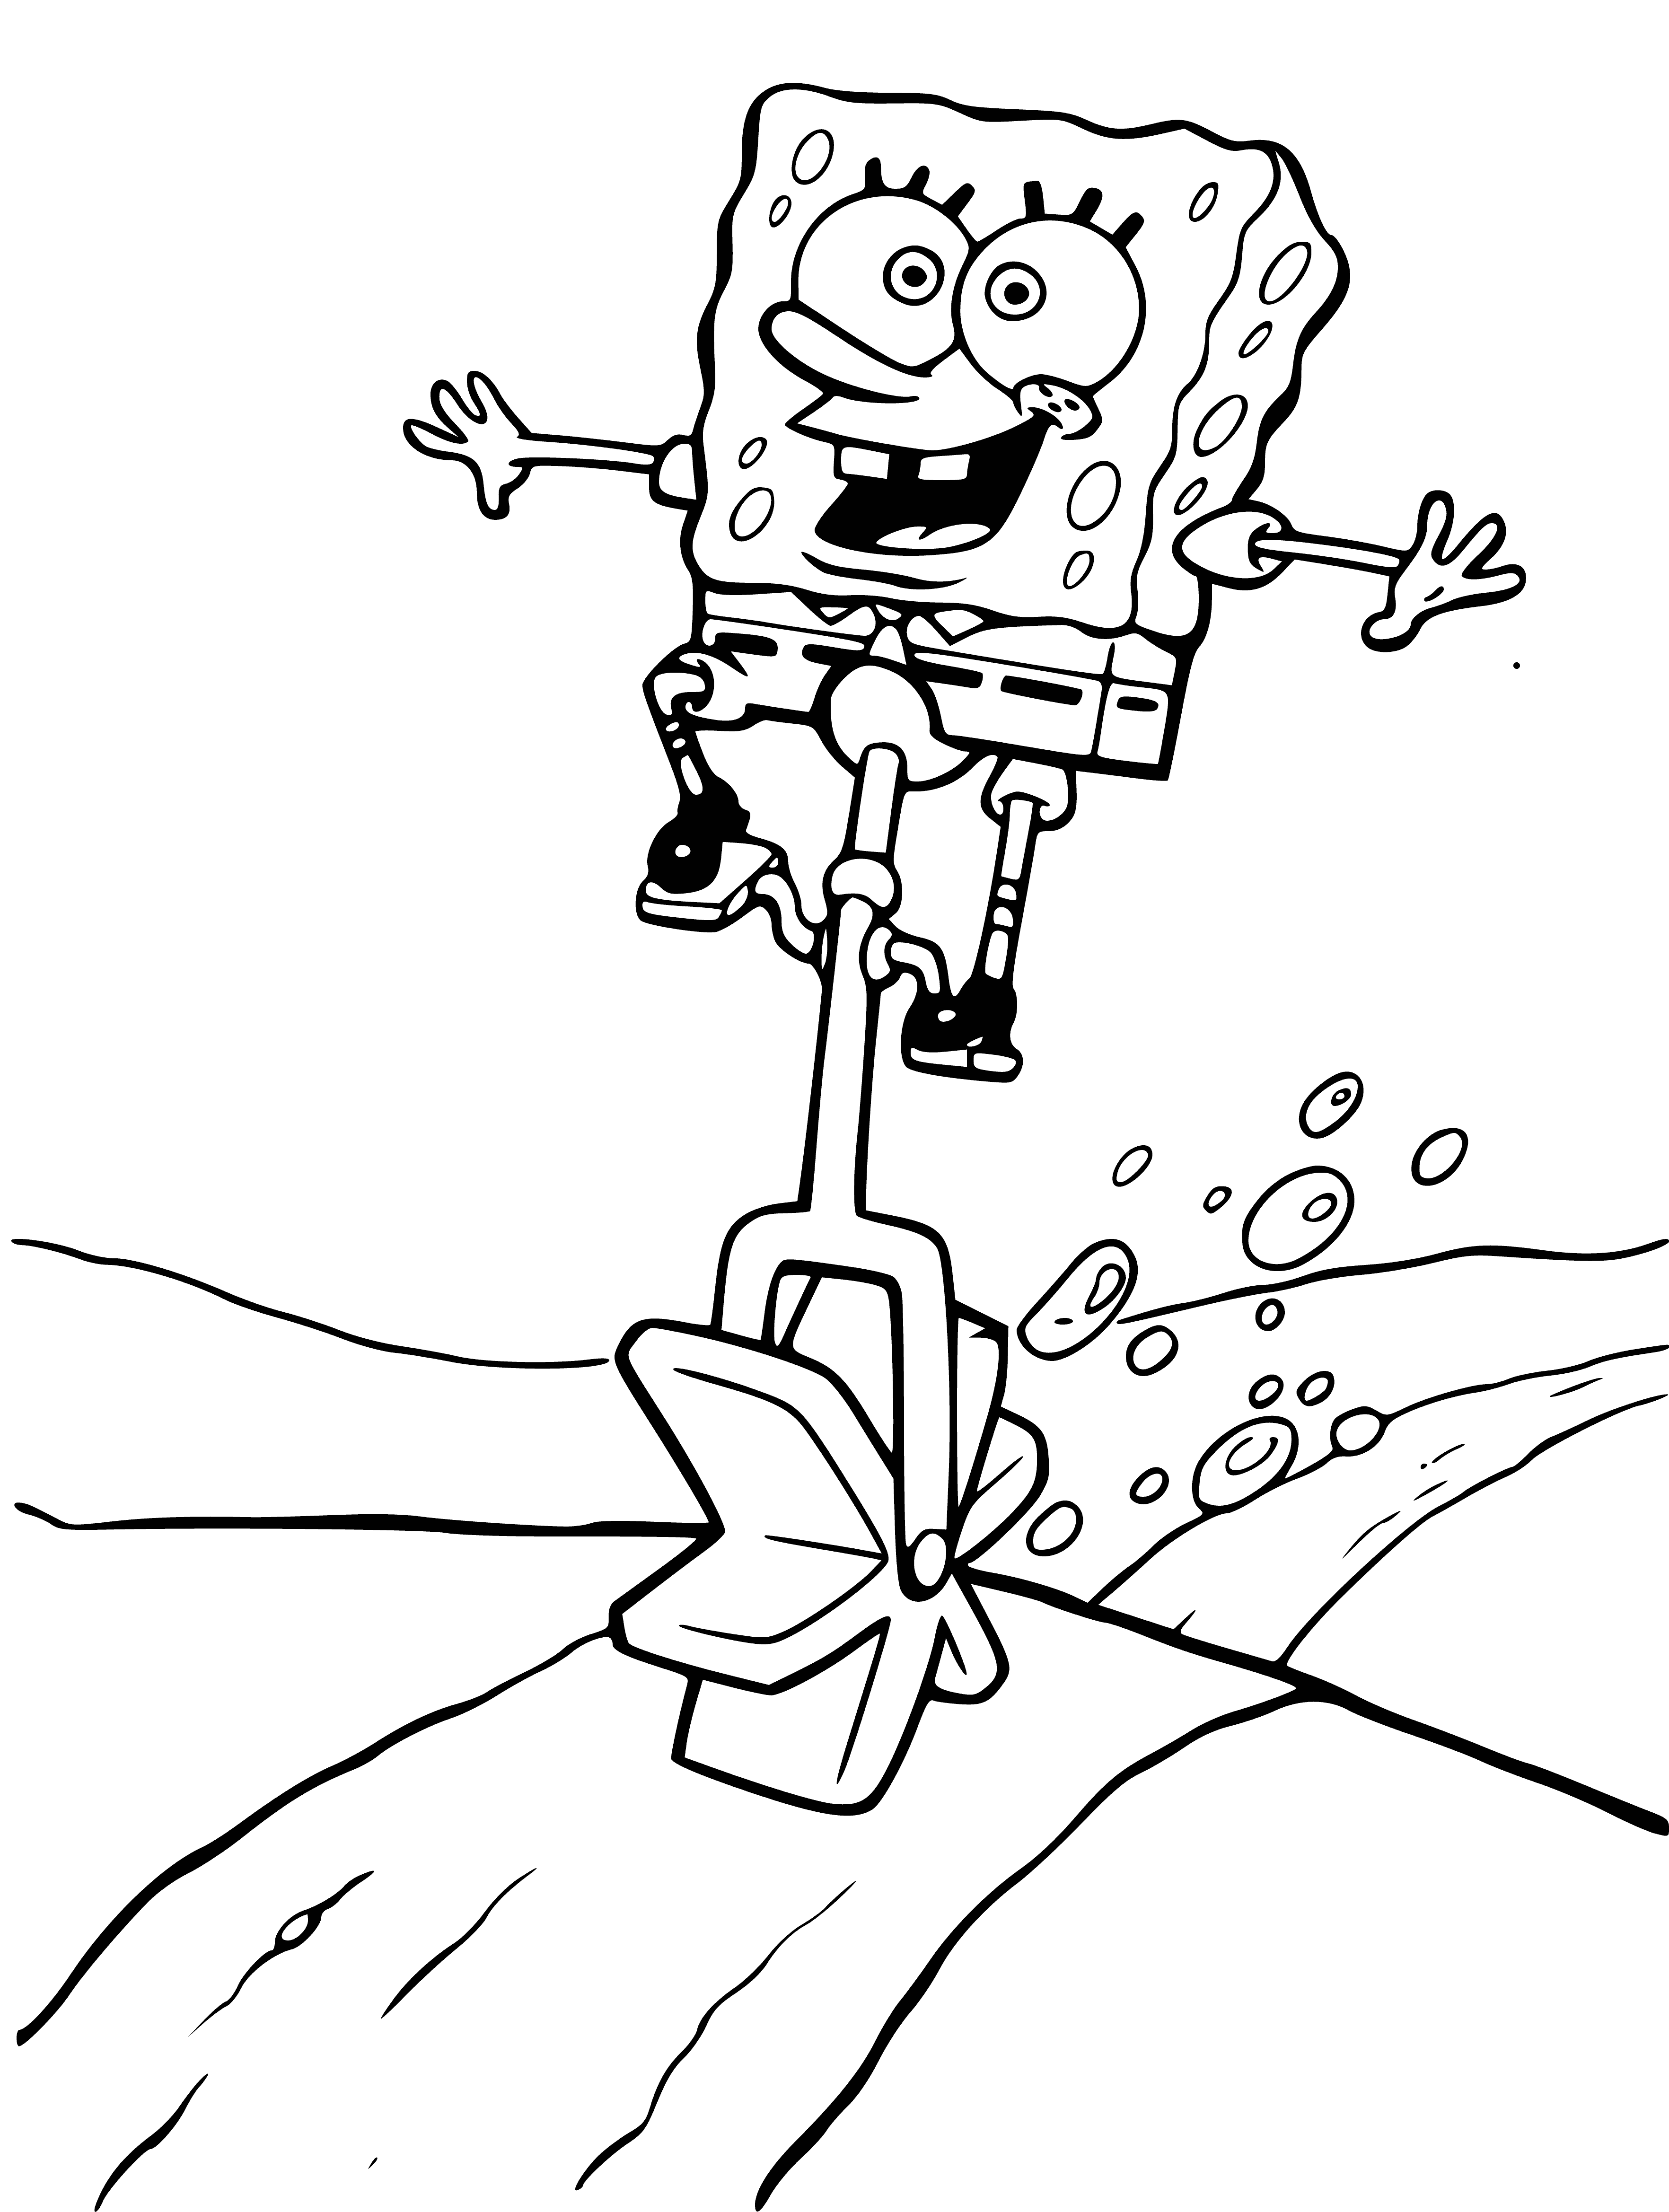 coloring page: SpongeBob Squarepants holds a spatula, wearing his iconic outfit and smiling with big blue eyes. Yellow background. #SpongeBob